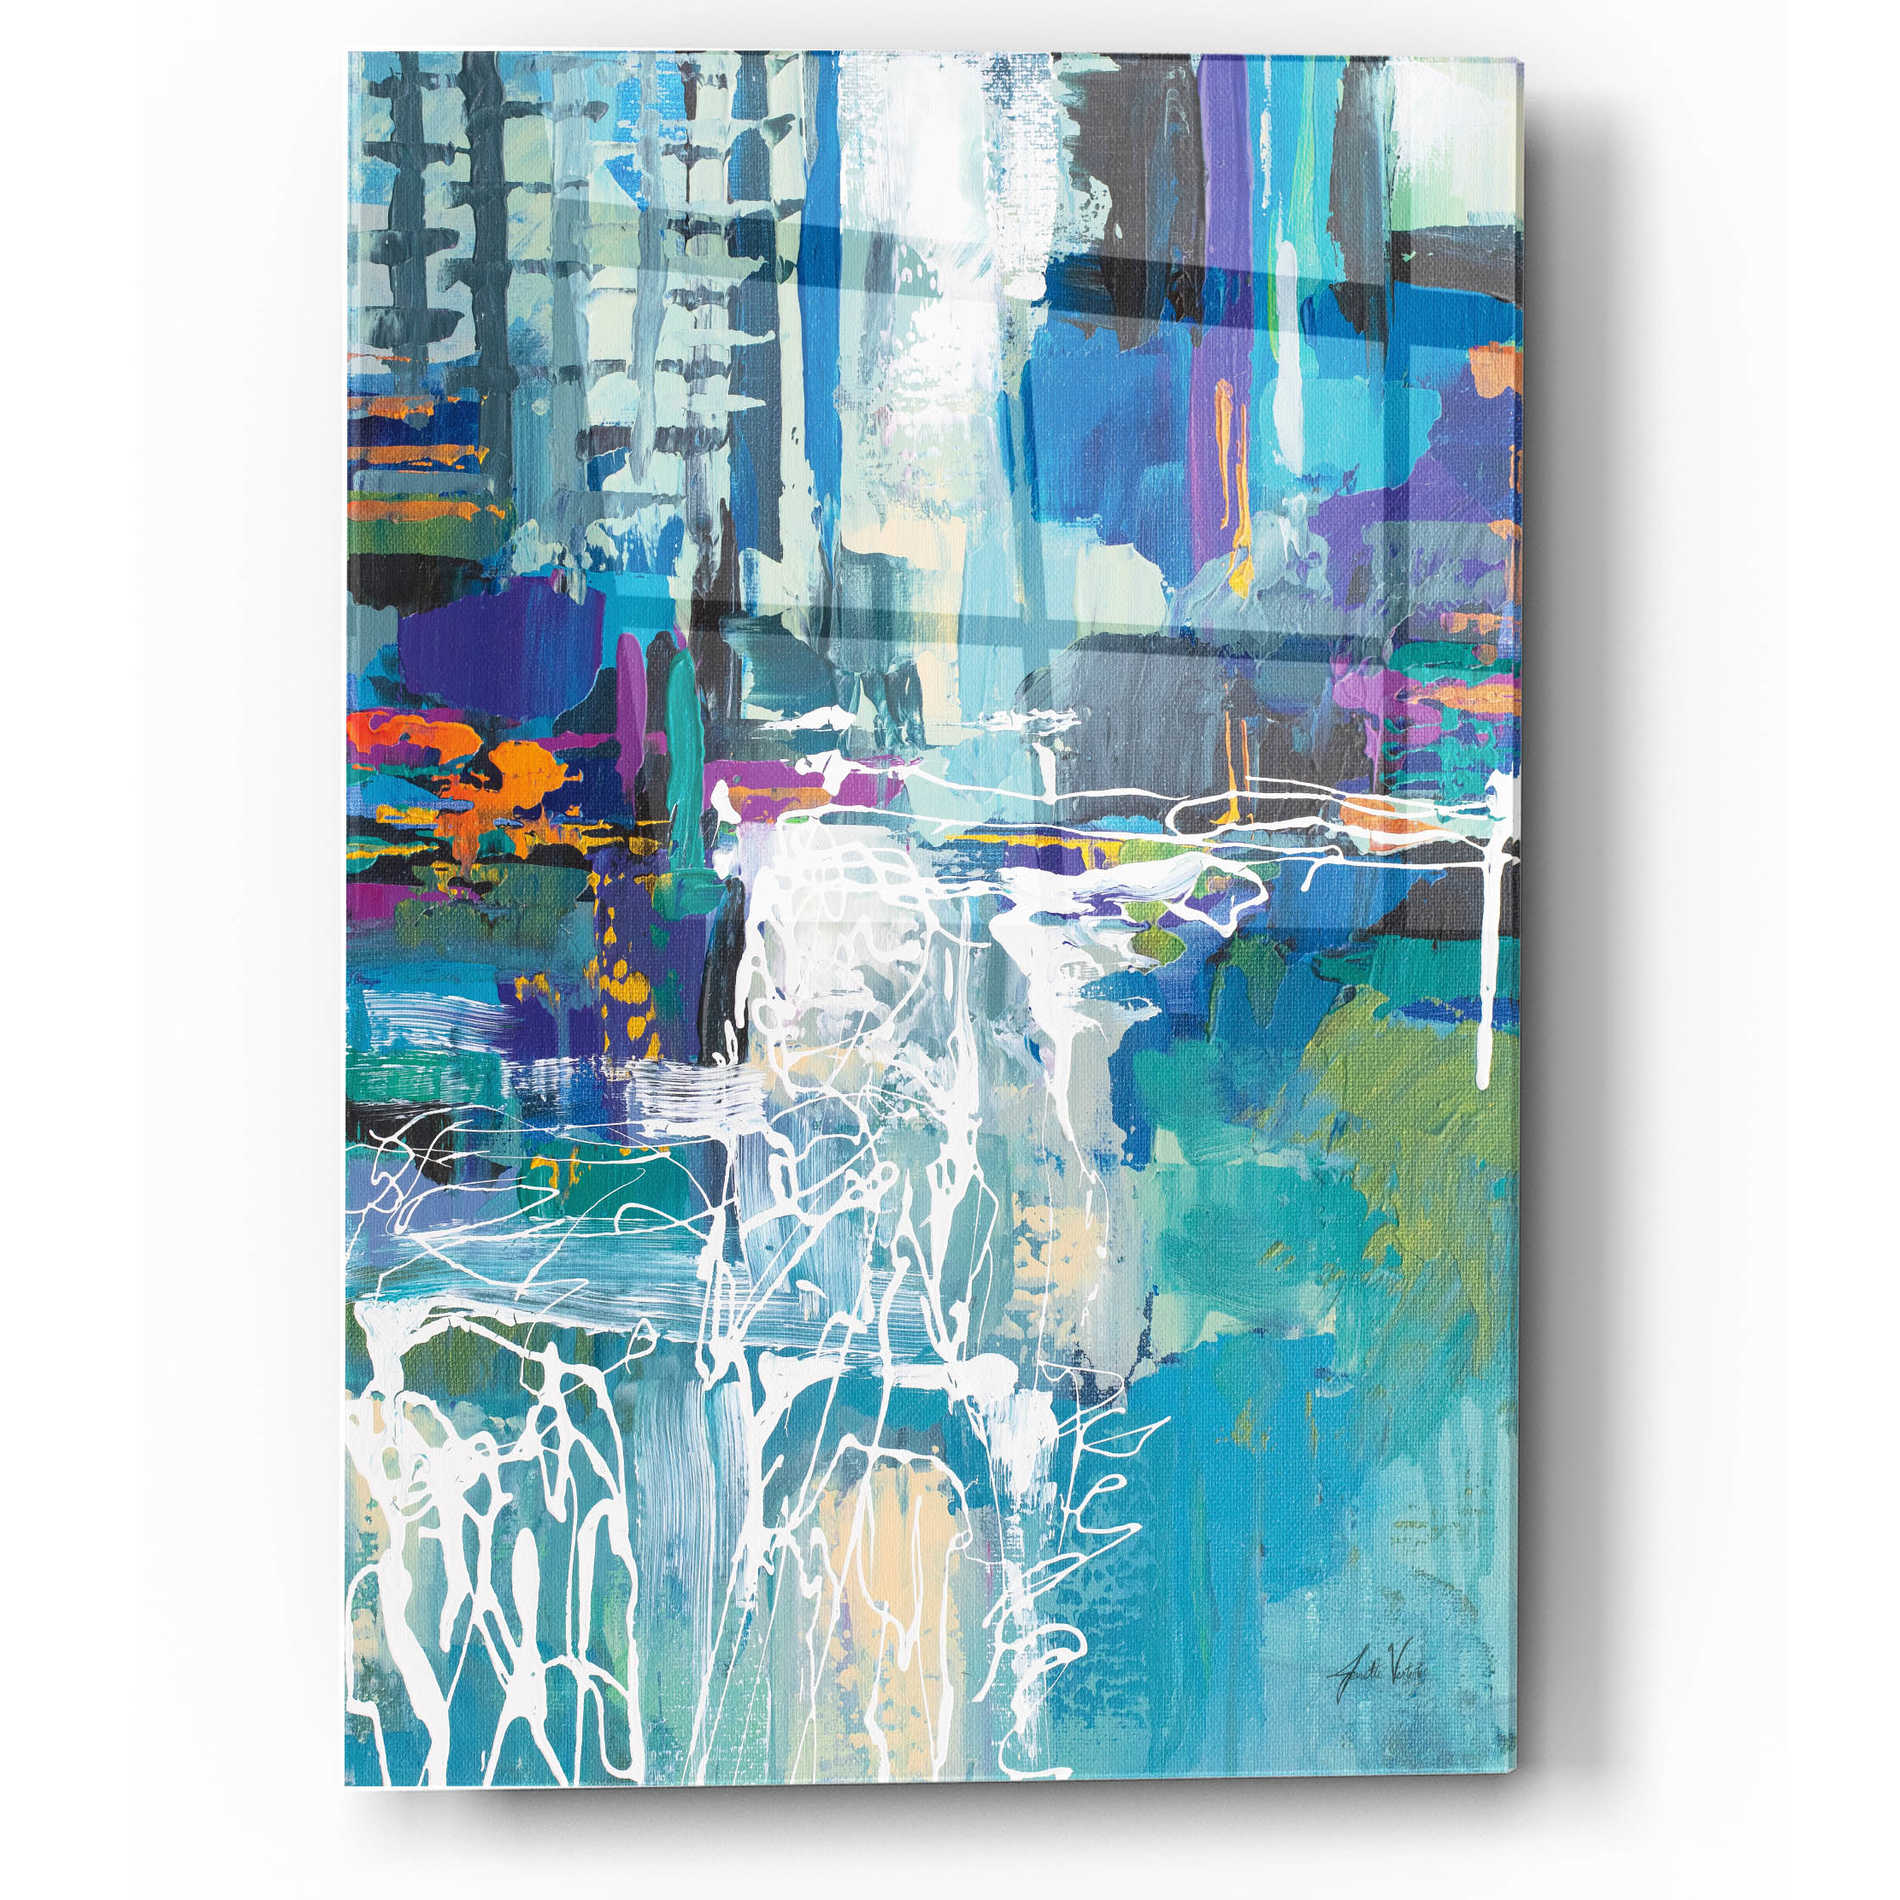 Epic Art 'Motion' by Jeanette Vertentes, Acrylic Glass Wall Art,12x16